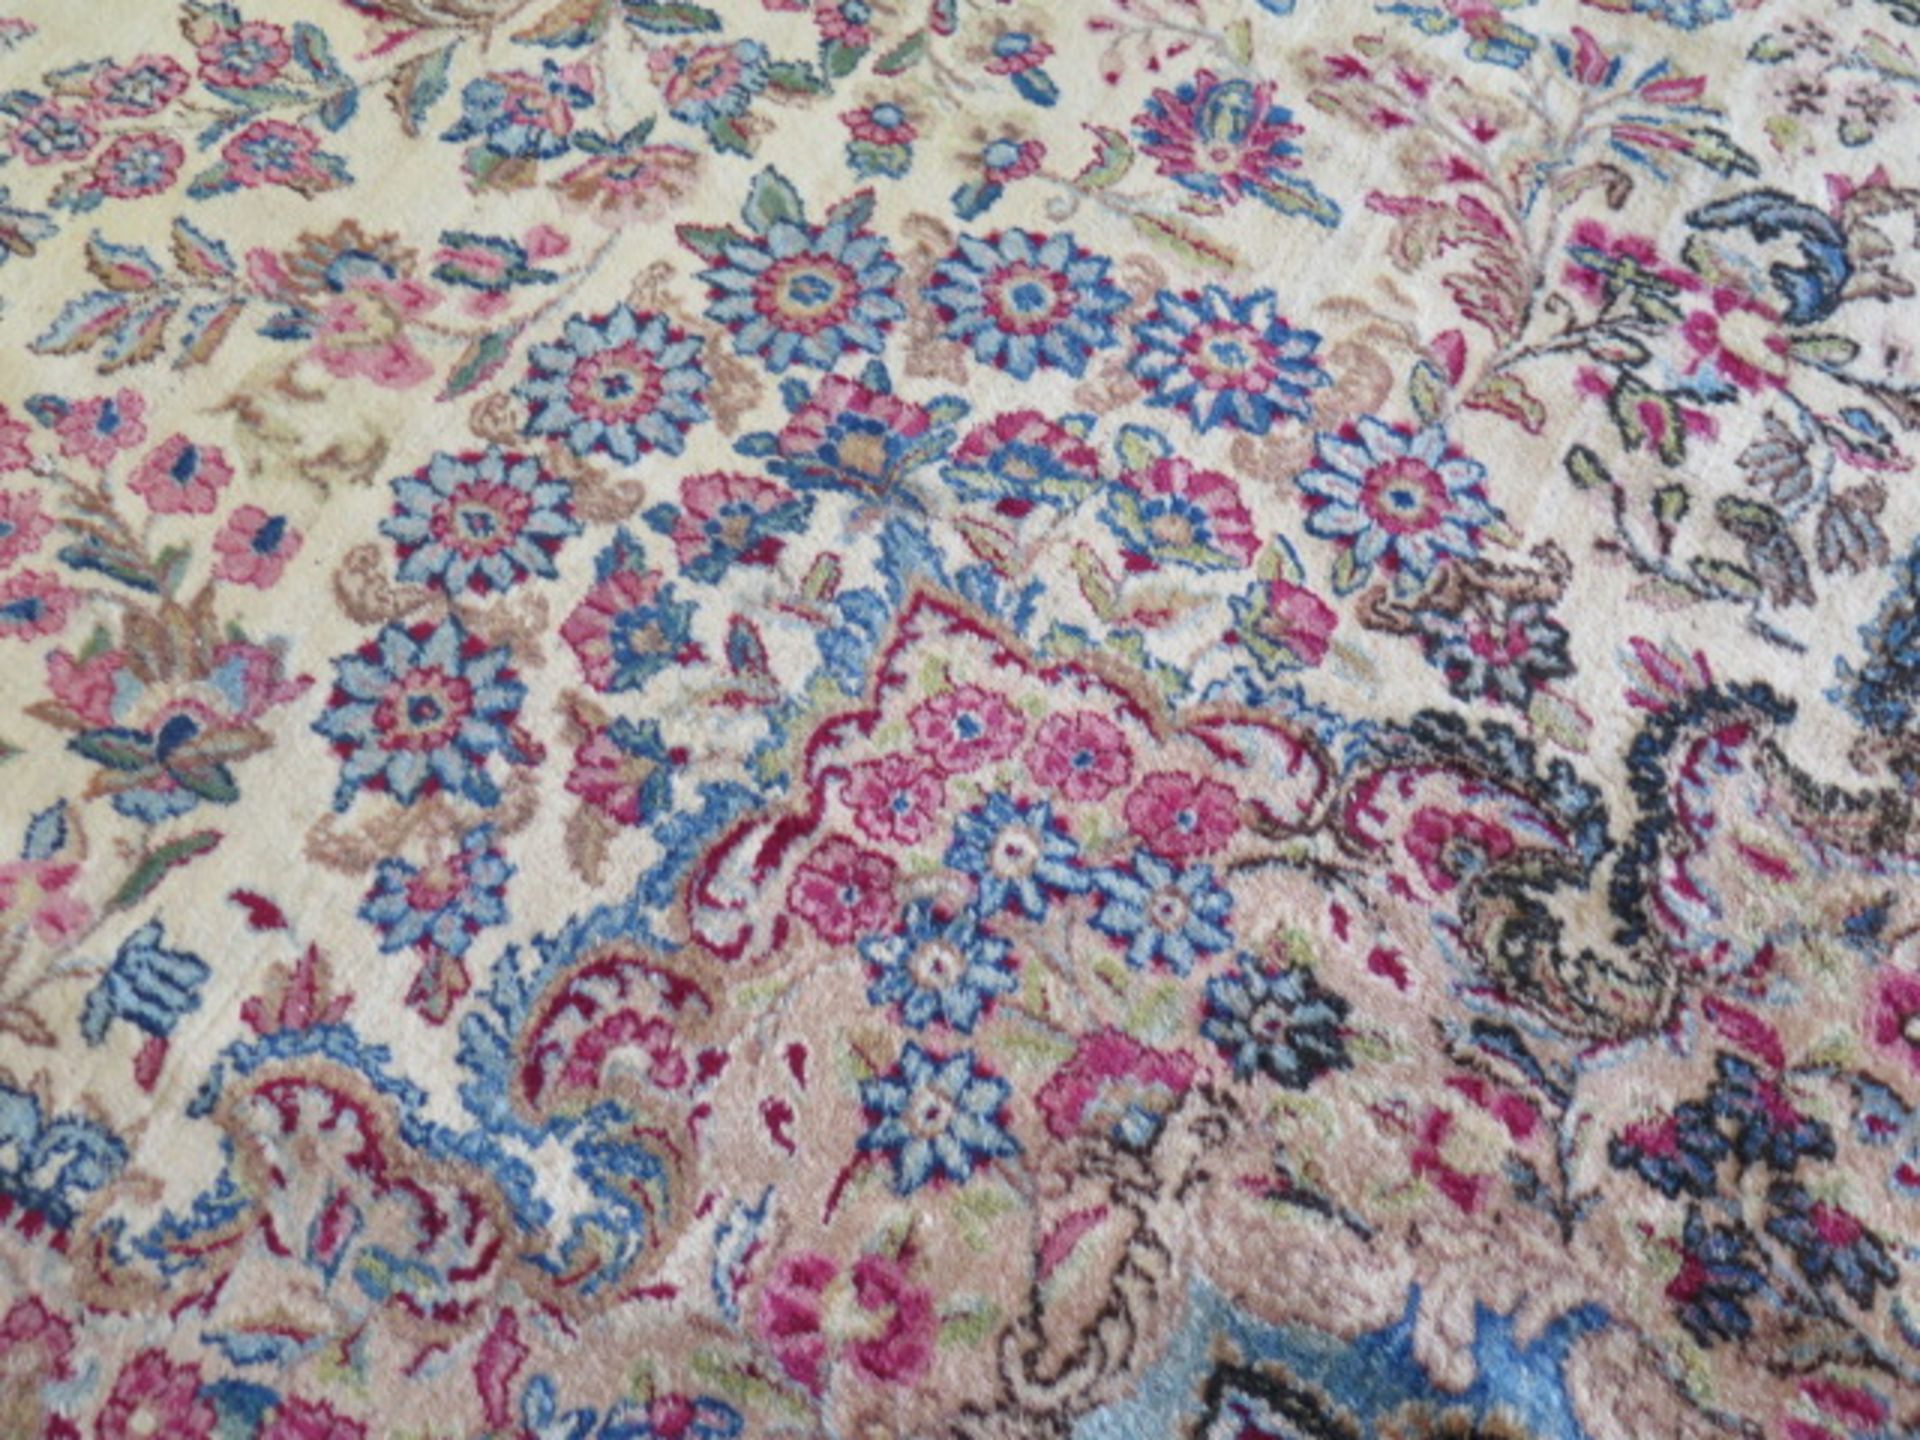 12.5' x 23' Persian Area Rug (High Quality) (SOLD AS-IS - NO WARRANTY) - Image 4 of 11